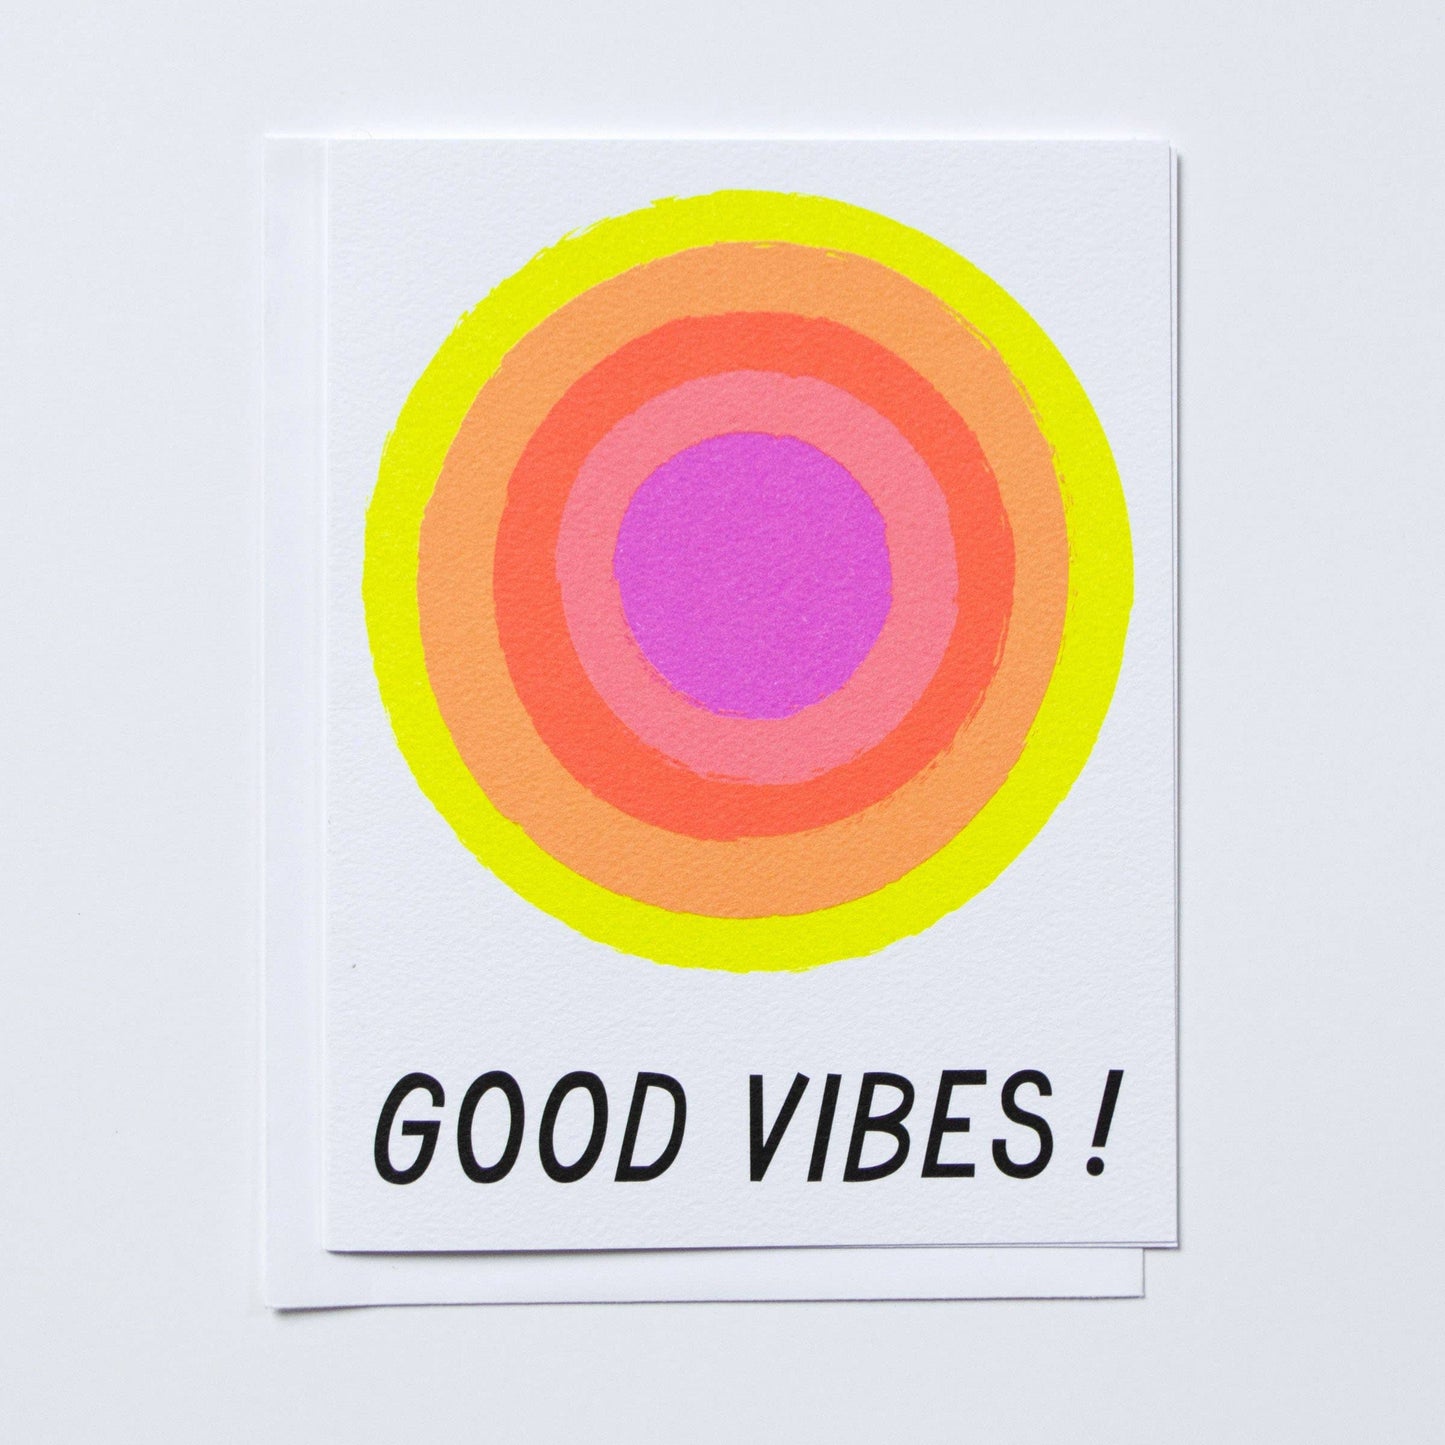 Banquet Workshop - Good Vibes Glowing Neon Sunshine Note Card